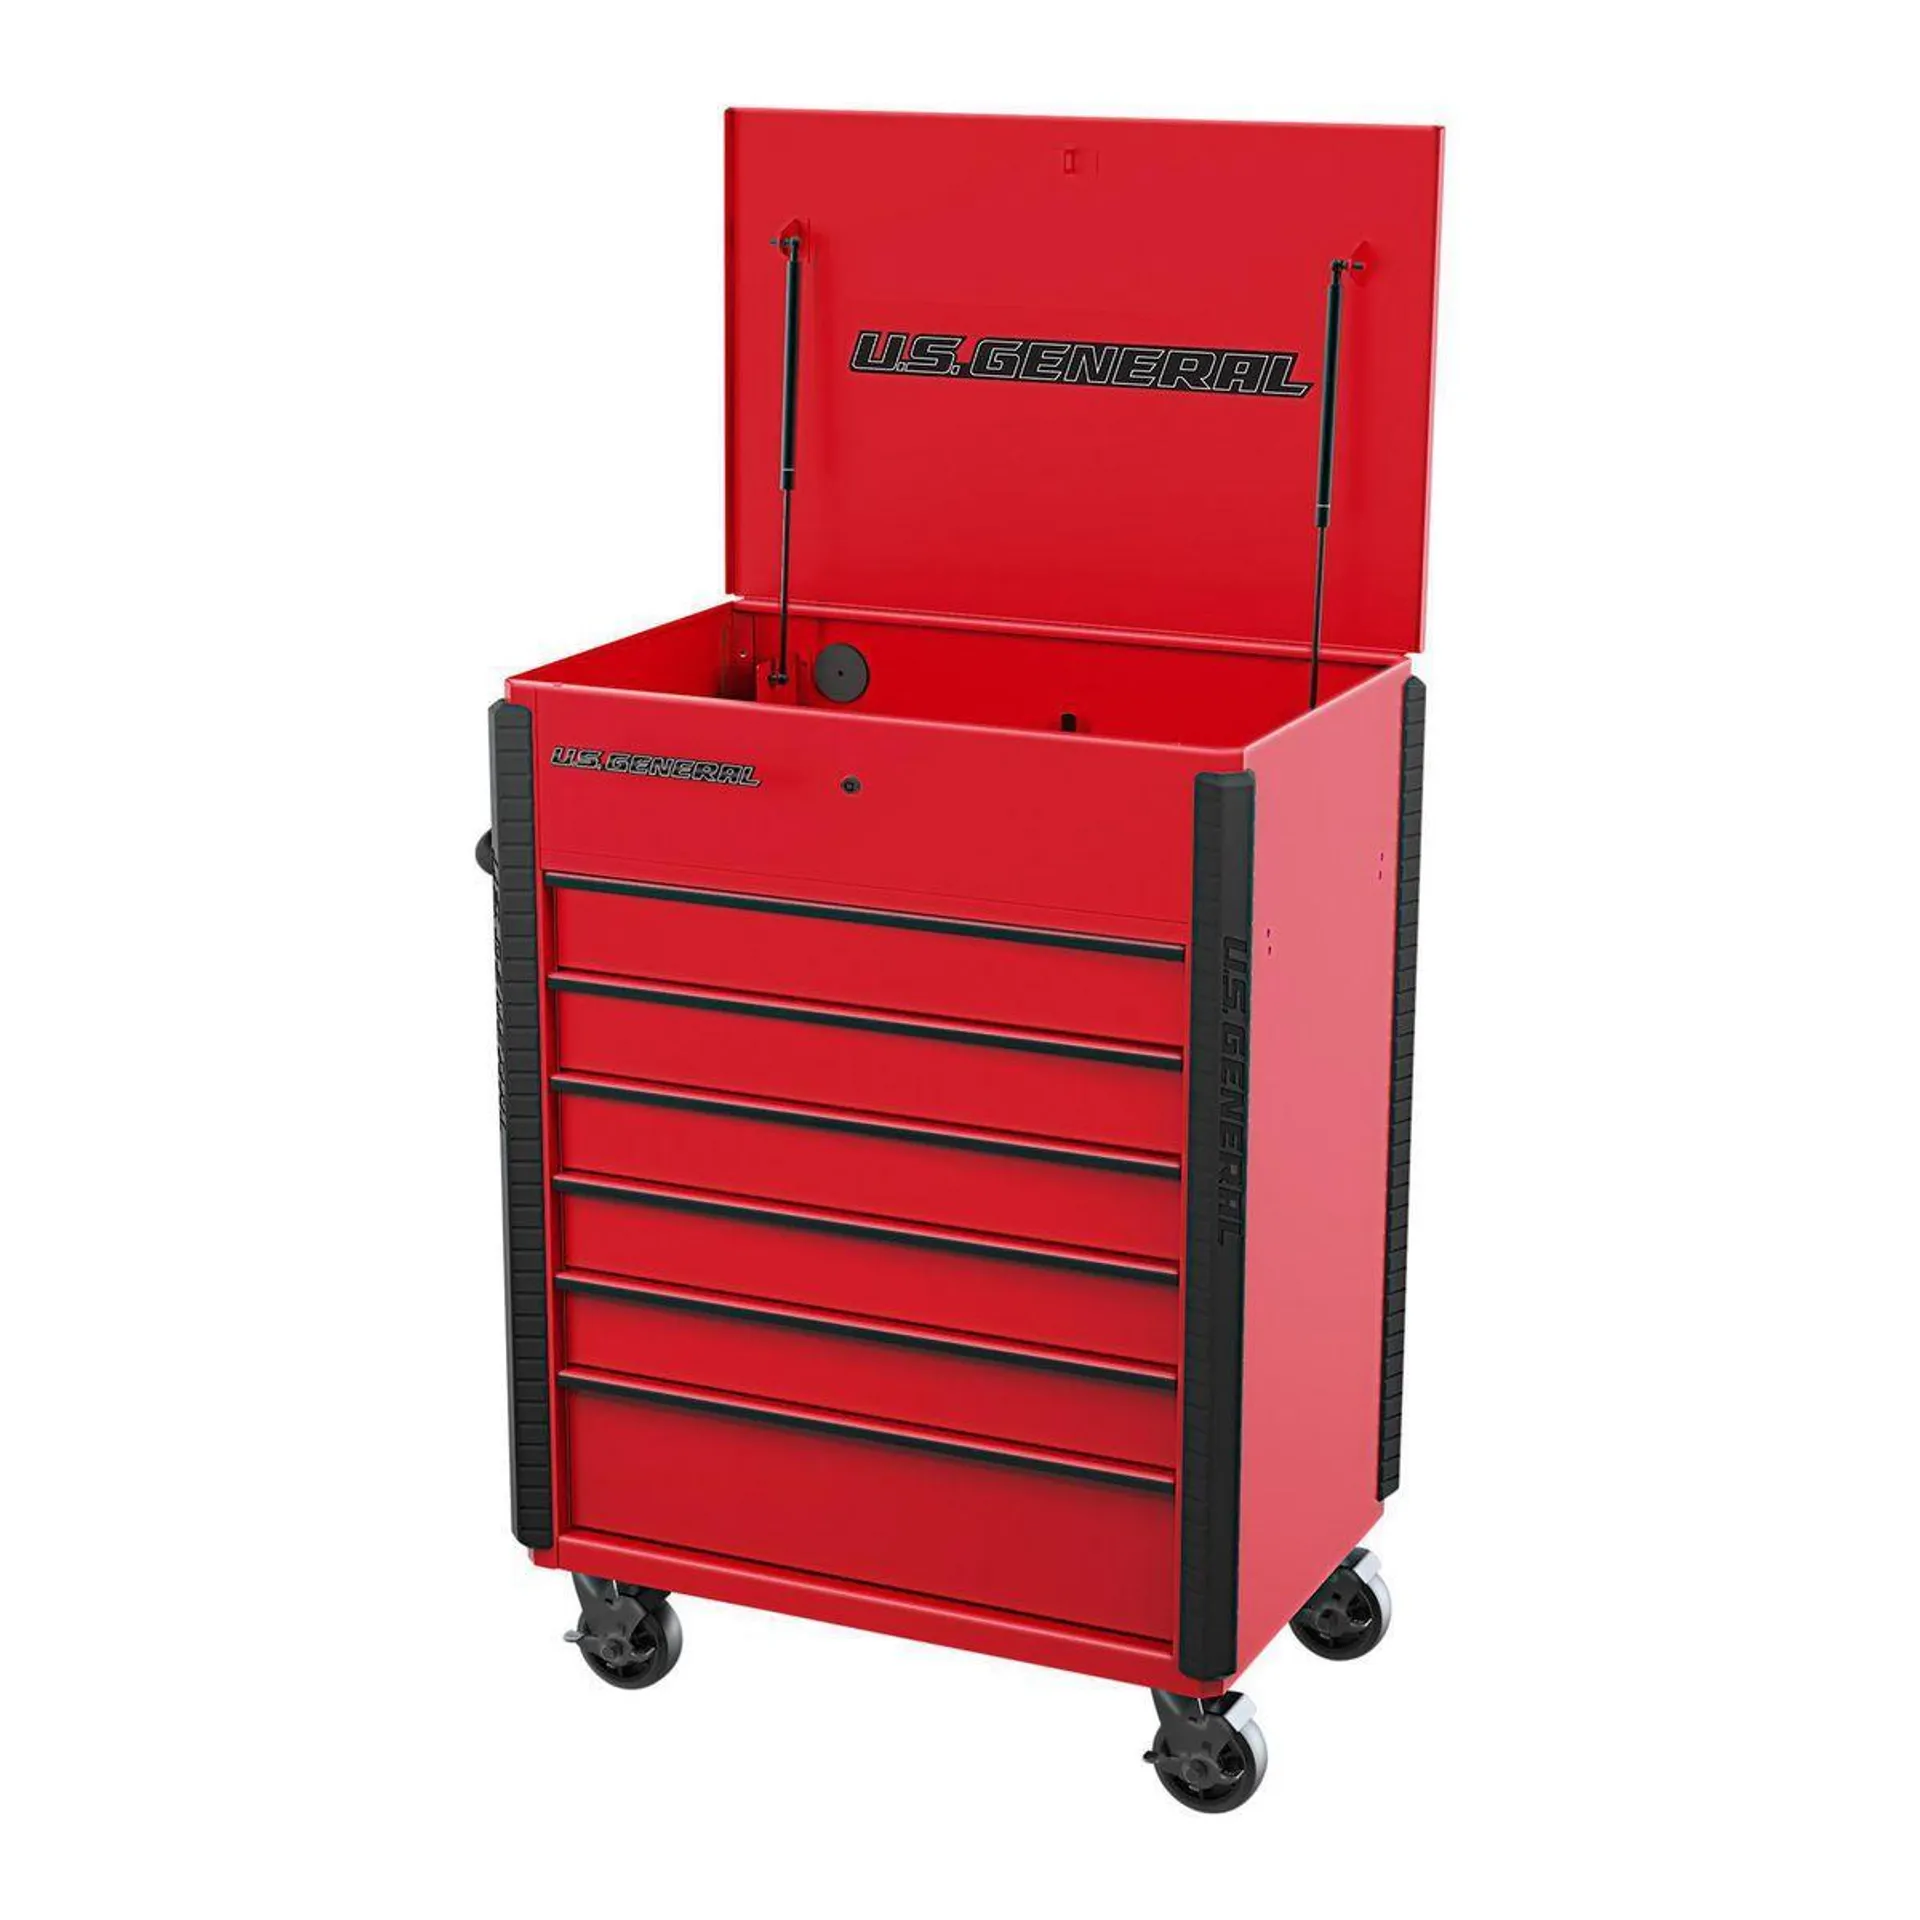 U.S. GENERAL 34 in. x 23 in., 6-Drawer, Full-Bank Service Cart, Red